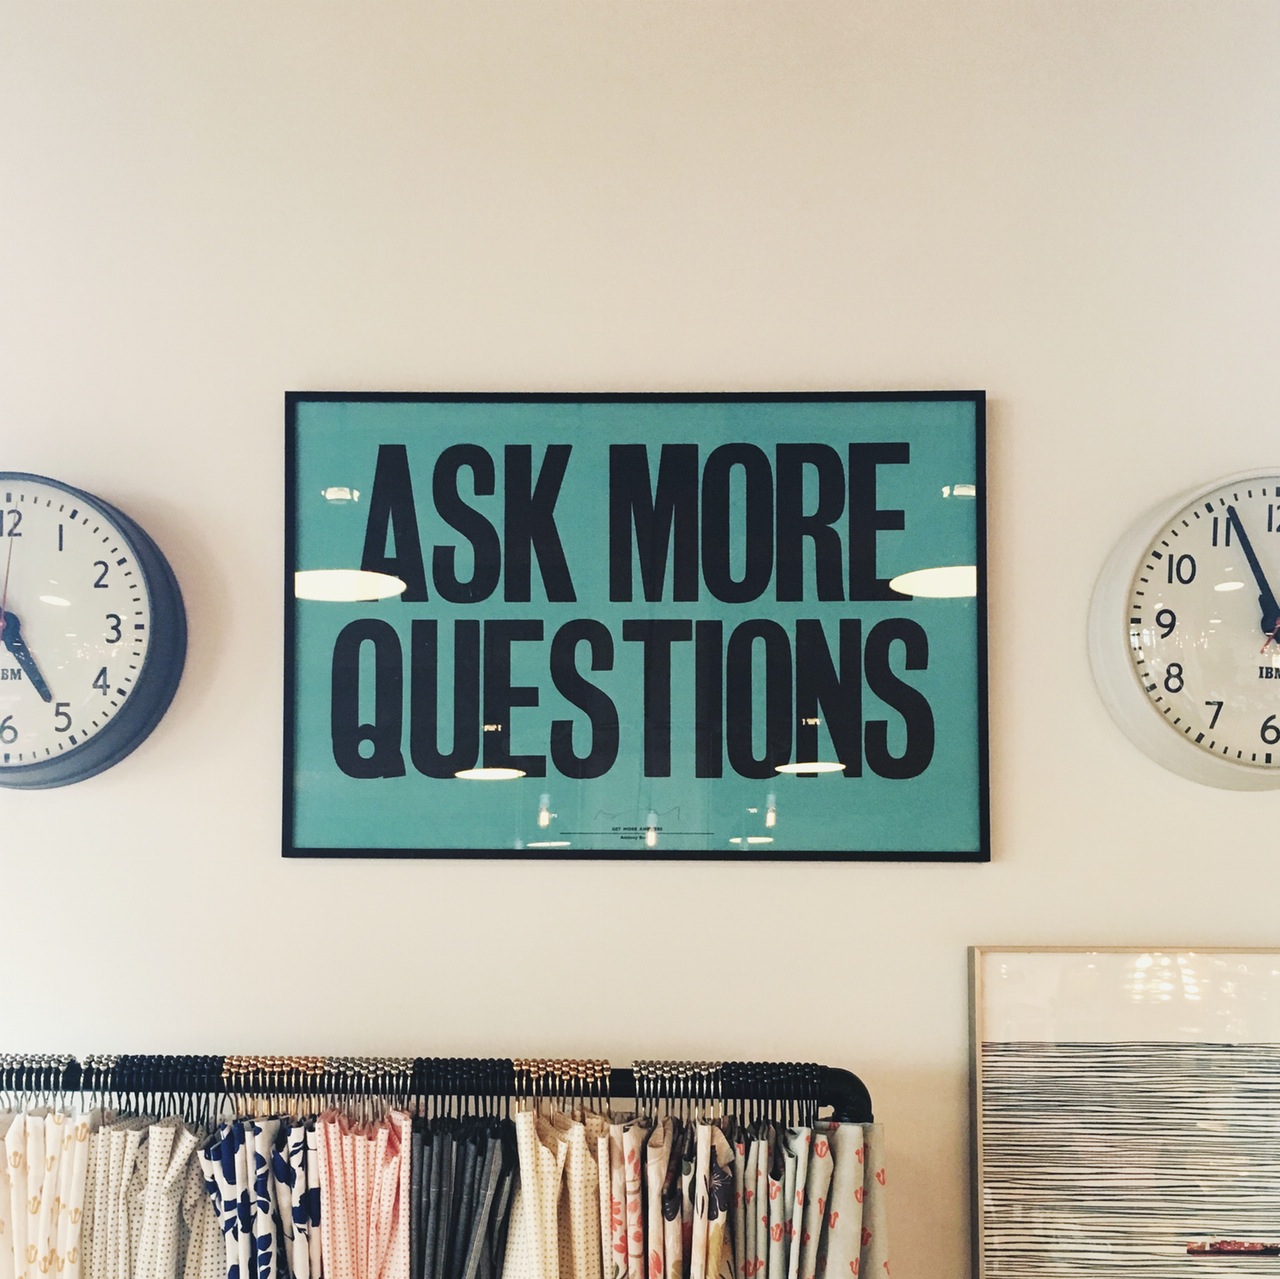 Poster on the wall that states "ask more questions"